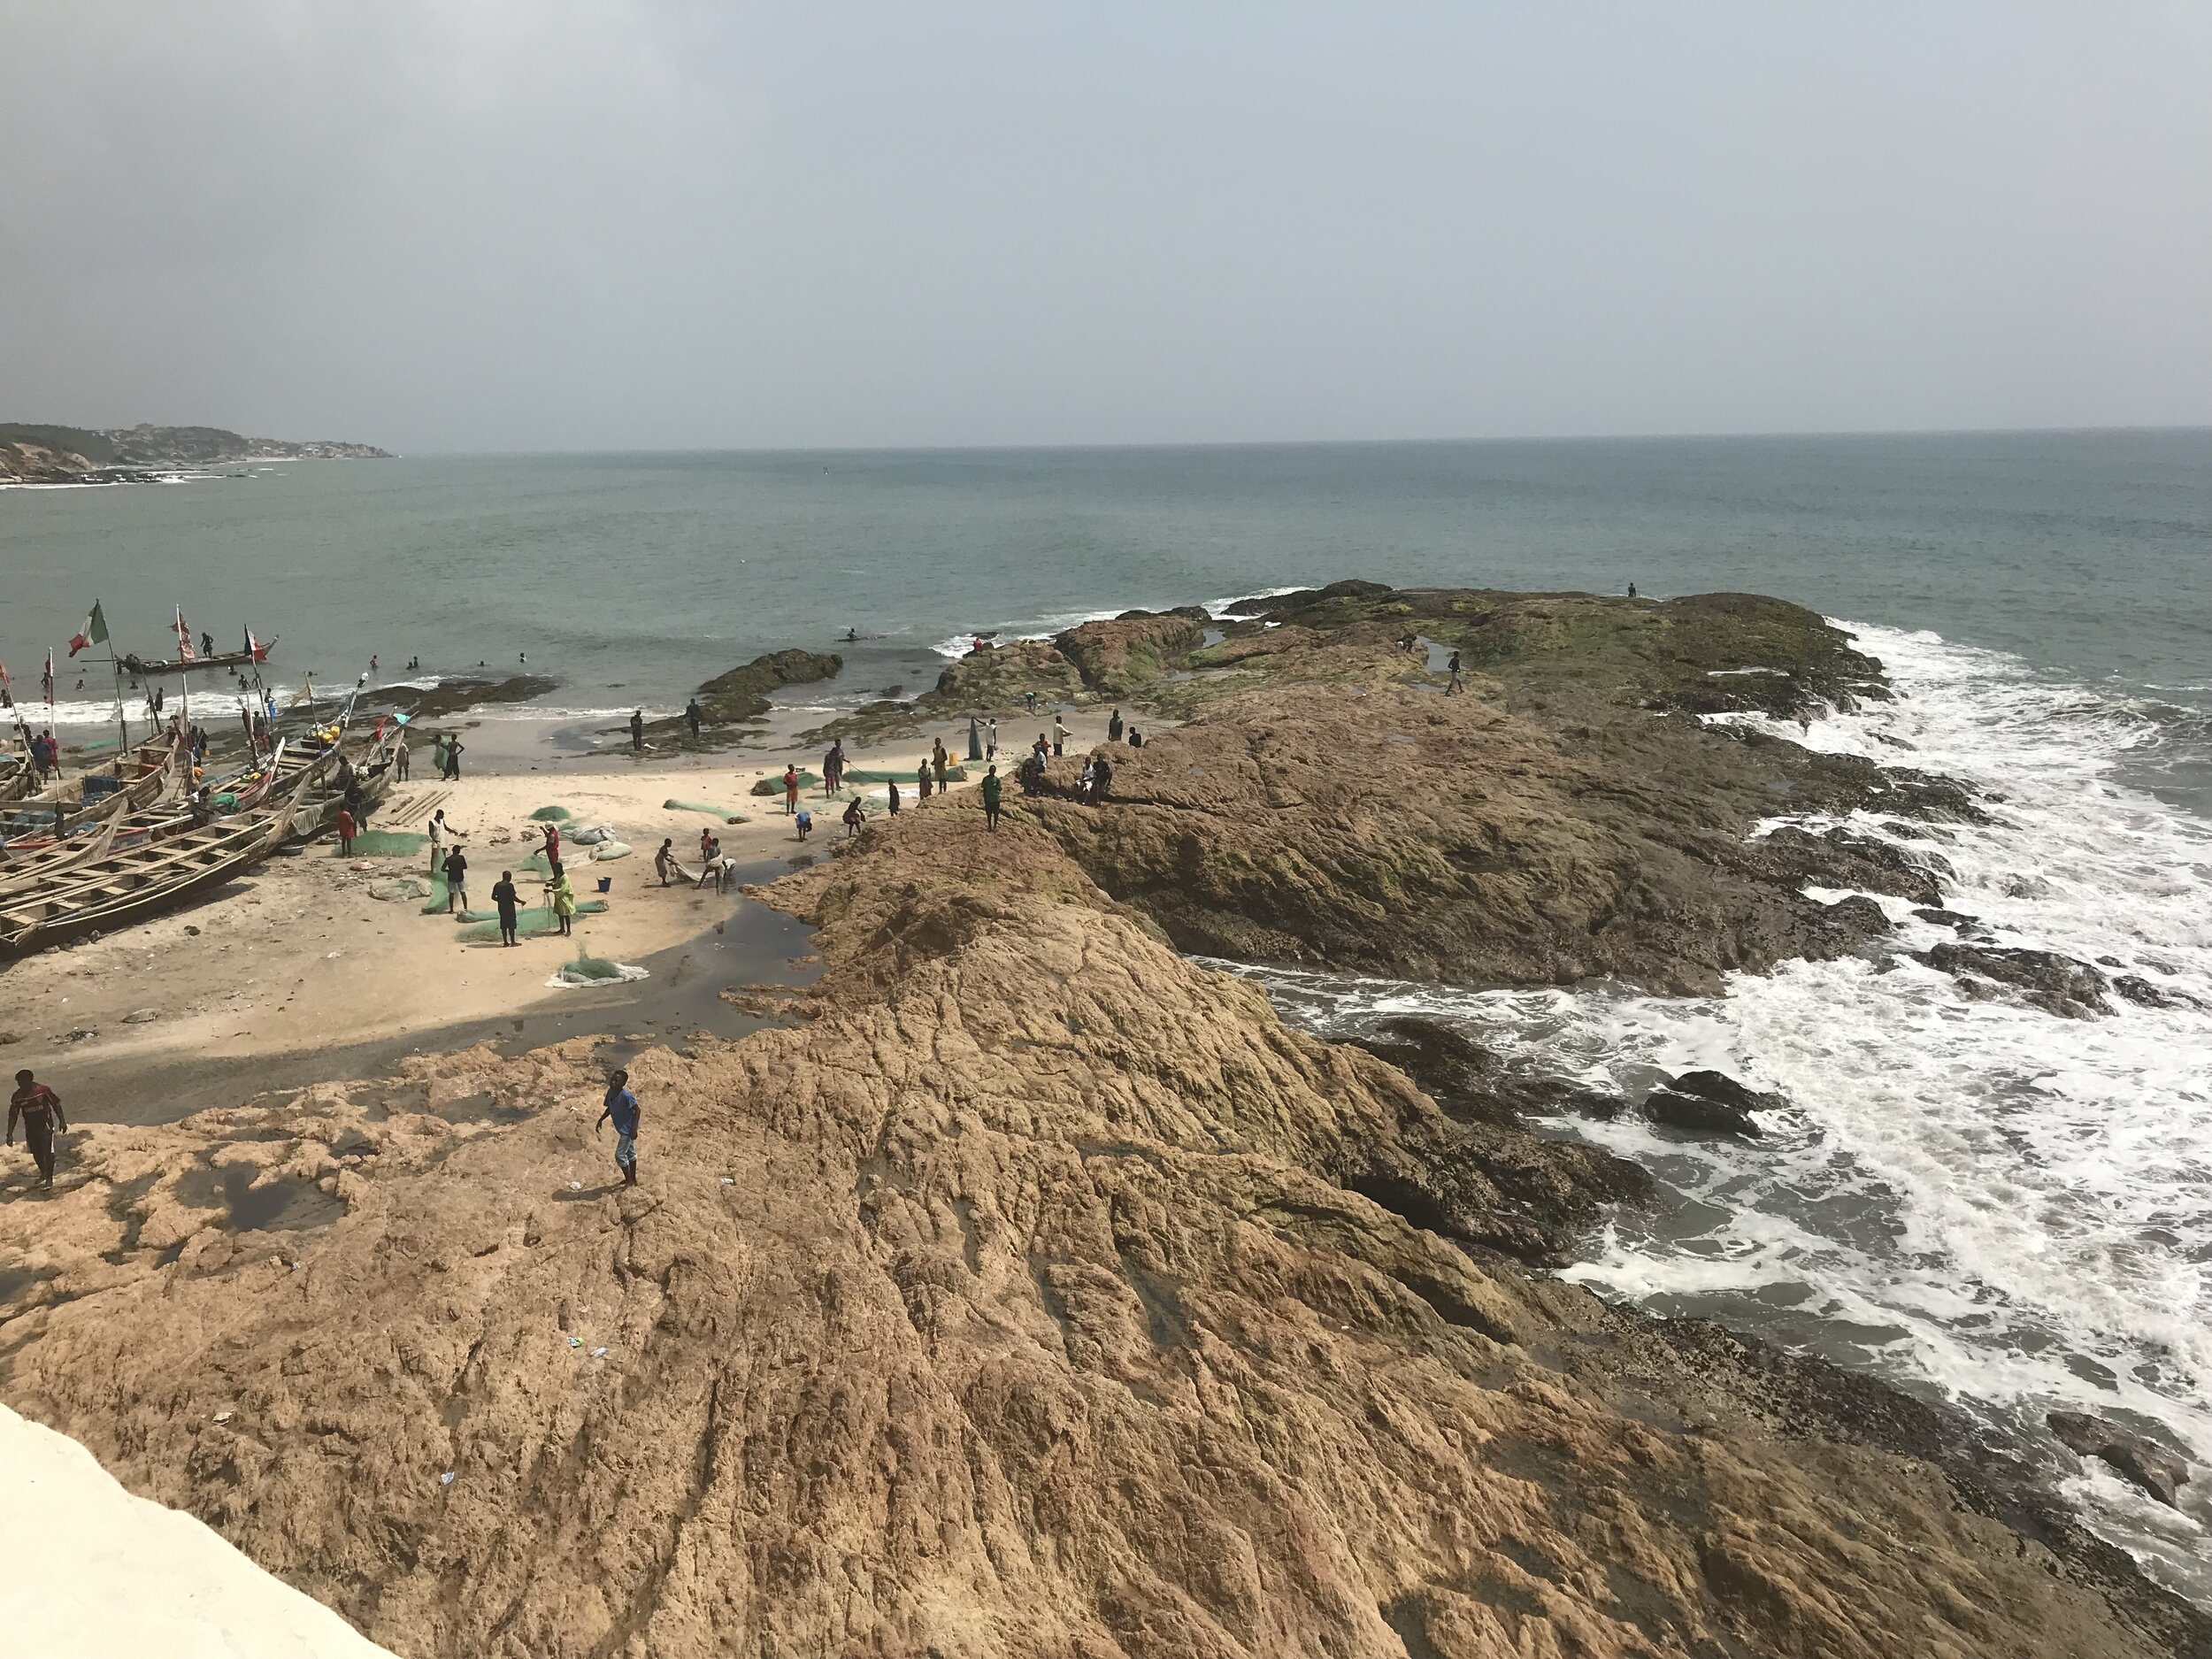   PICTURED:  The rock upon which Ghanaian slaves boarded ships headed for the new world 